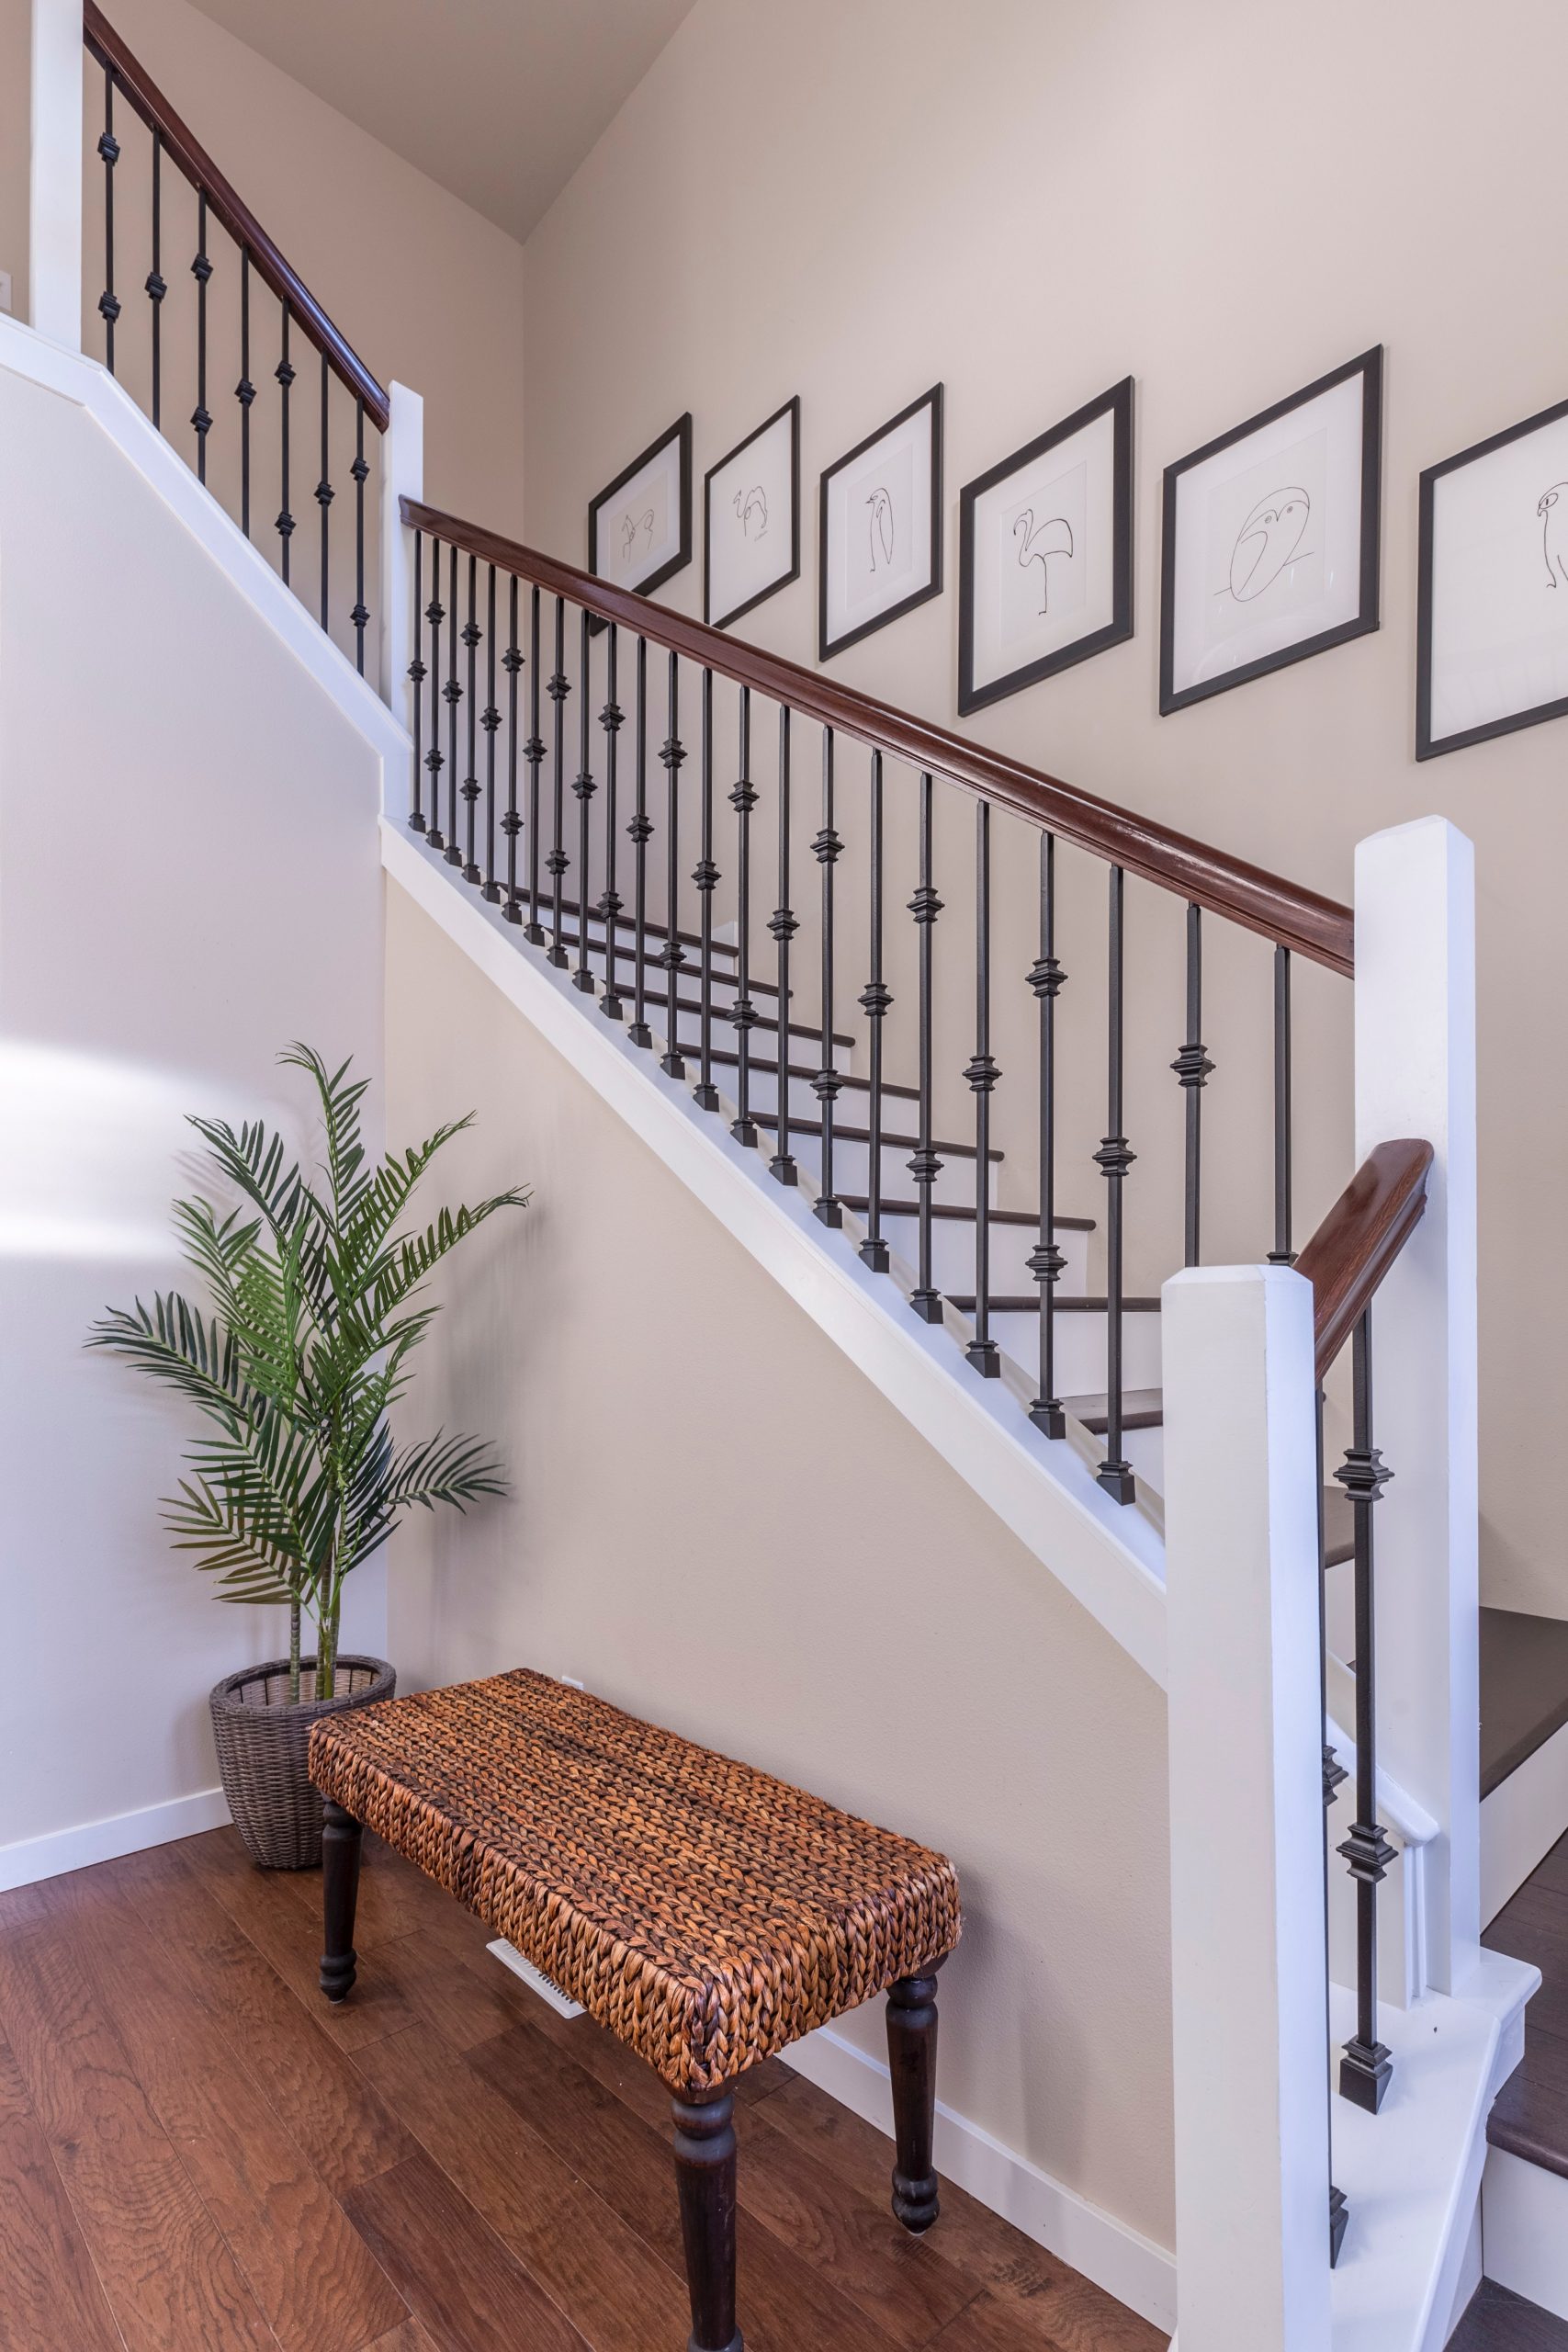 Hallways can often be overlooked. They are the connecting passages to the rooms you spend the most time in but can also be the first thing that people see when they enter your home